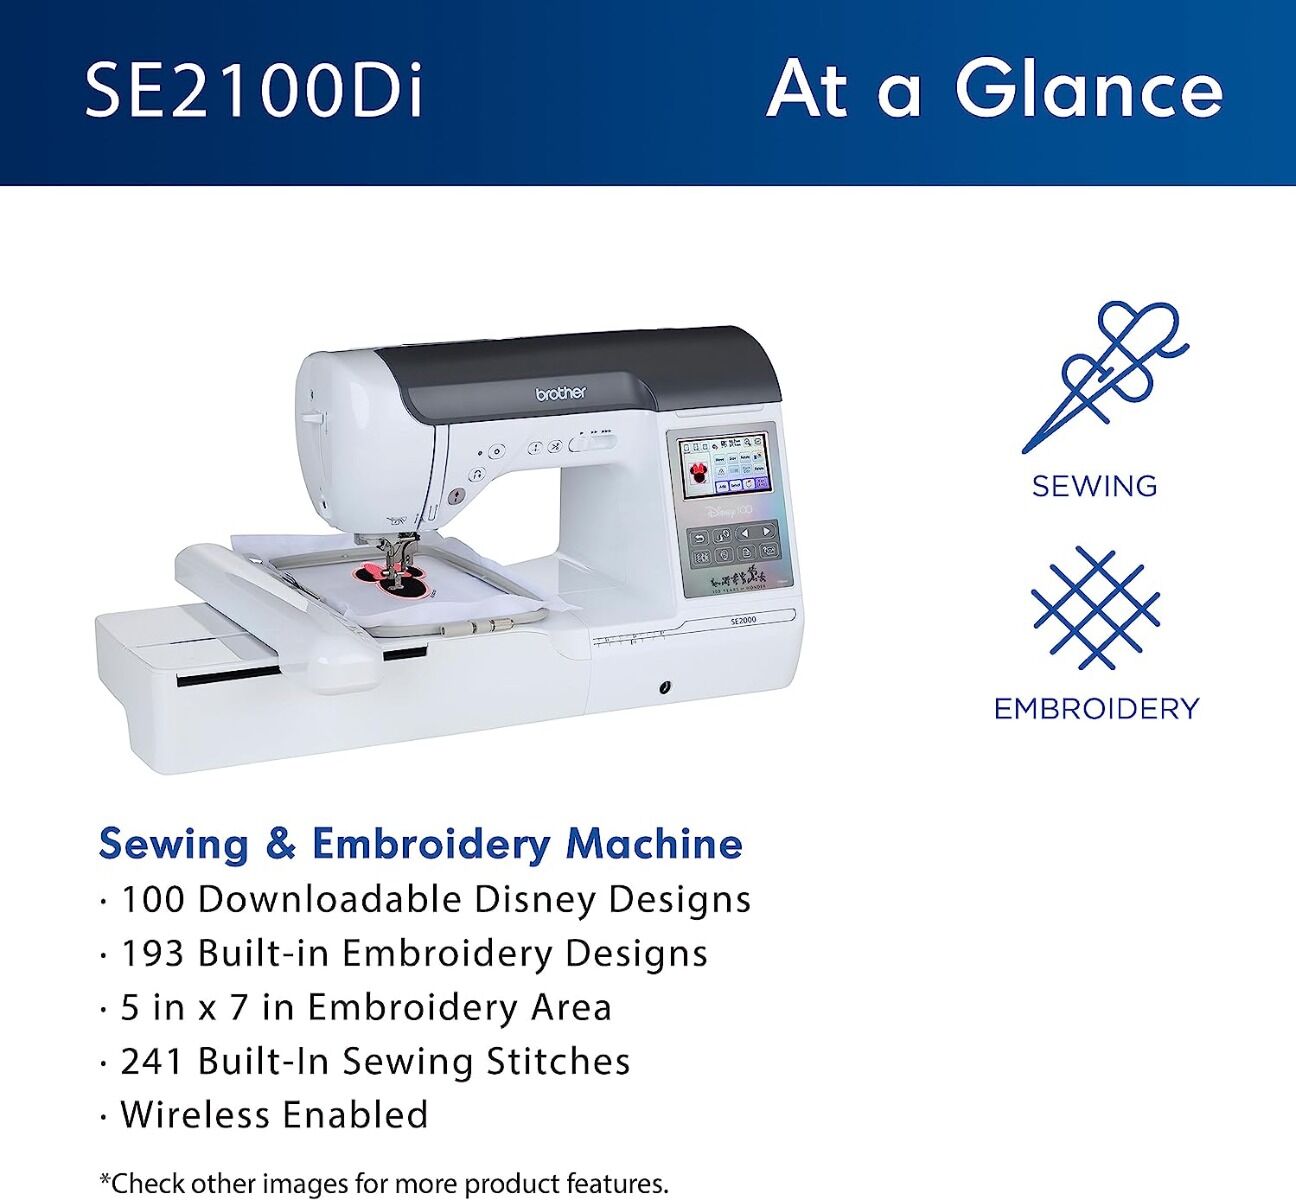 Brother SE2000 Embroidery Machine Overview